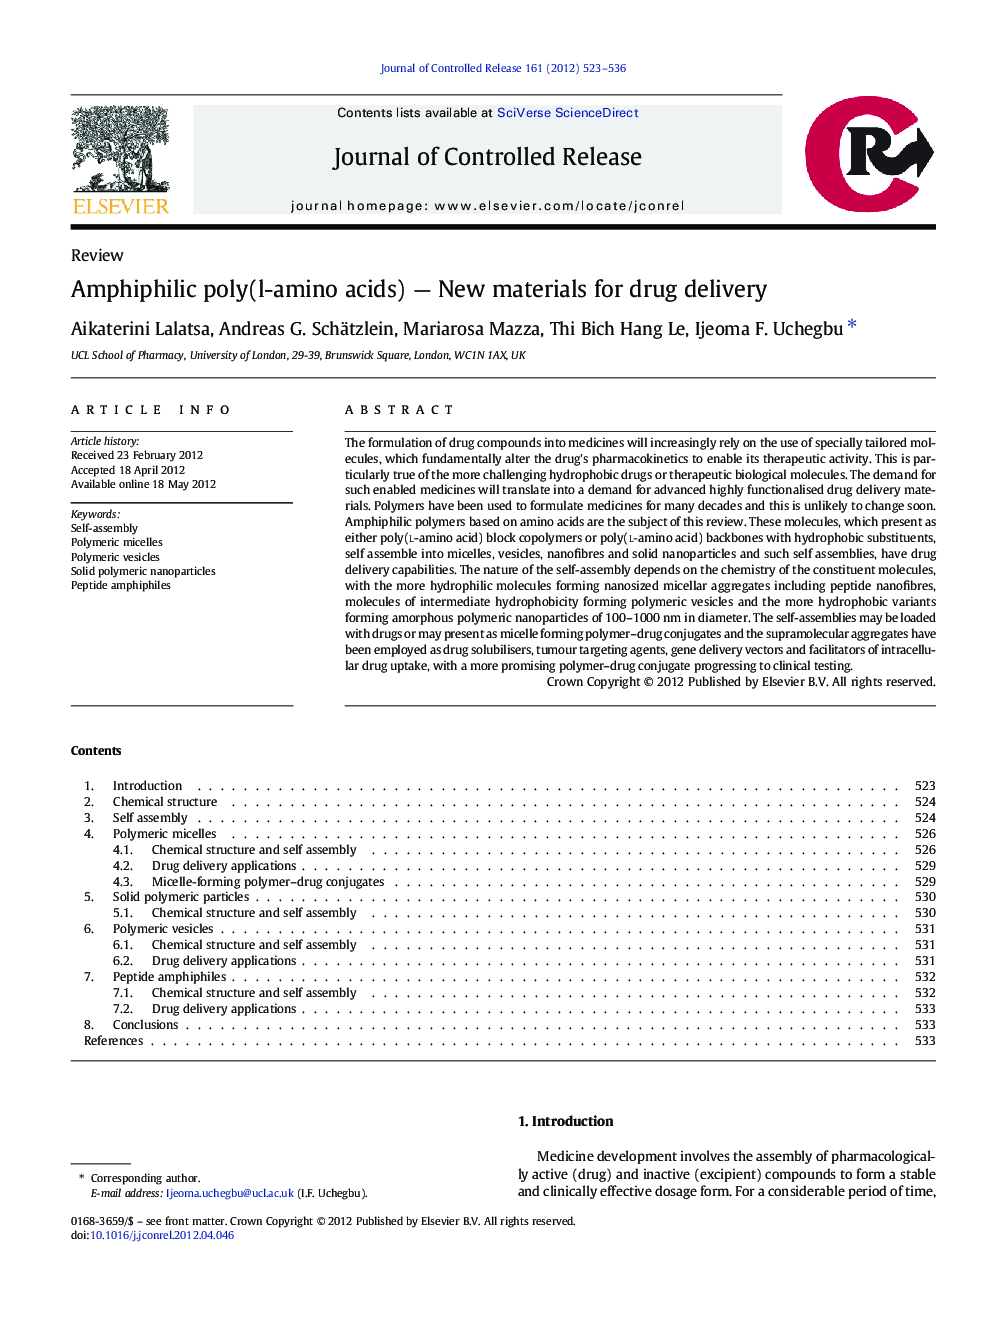 Amphiphilic poly(l-amino acids) — New materials for drug delivery